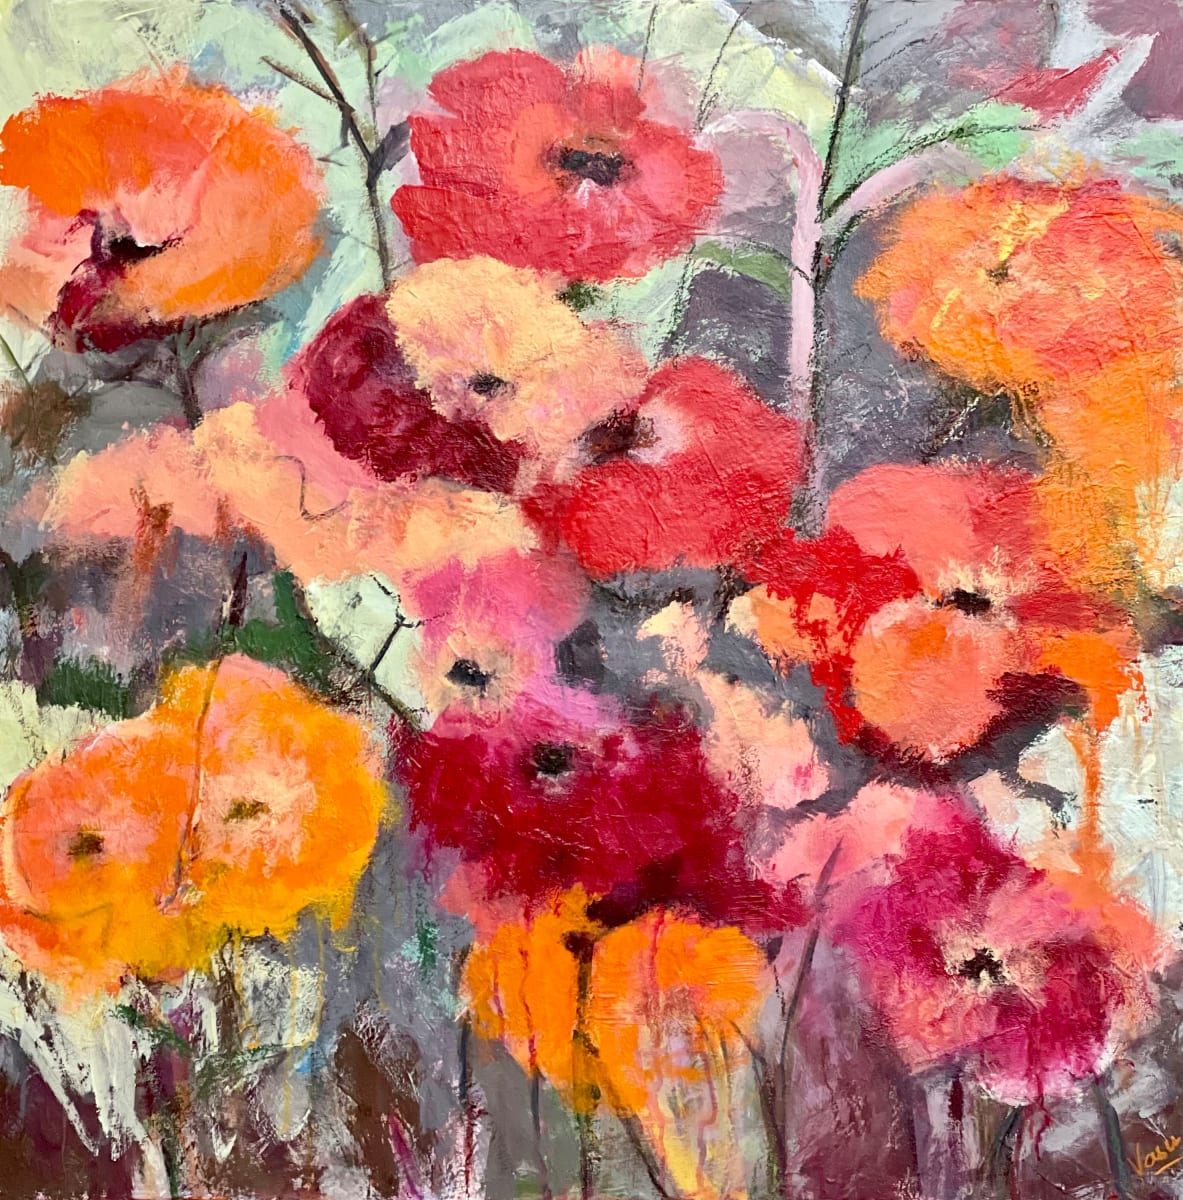 Summer Blooms by Vasu Tolia  Image: Enchanting poppies blooming in a garden are very inviting .  One wants to pluck them and enjoy in a vase. Medley of analogous colors is on display here. This artwork was judged to be a silver place winner in Art Ascent magazine  contest on Summer in 2022.